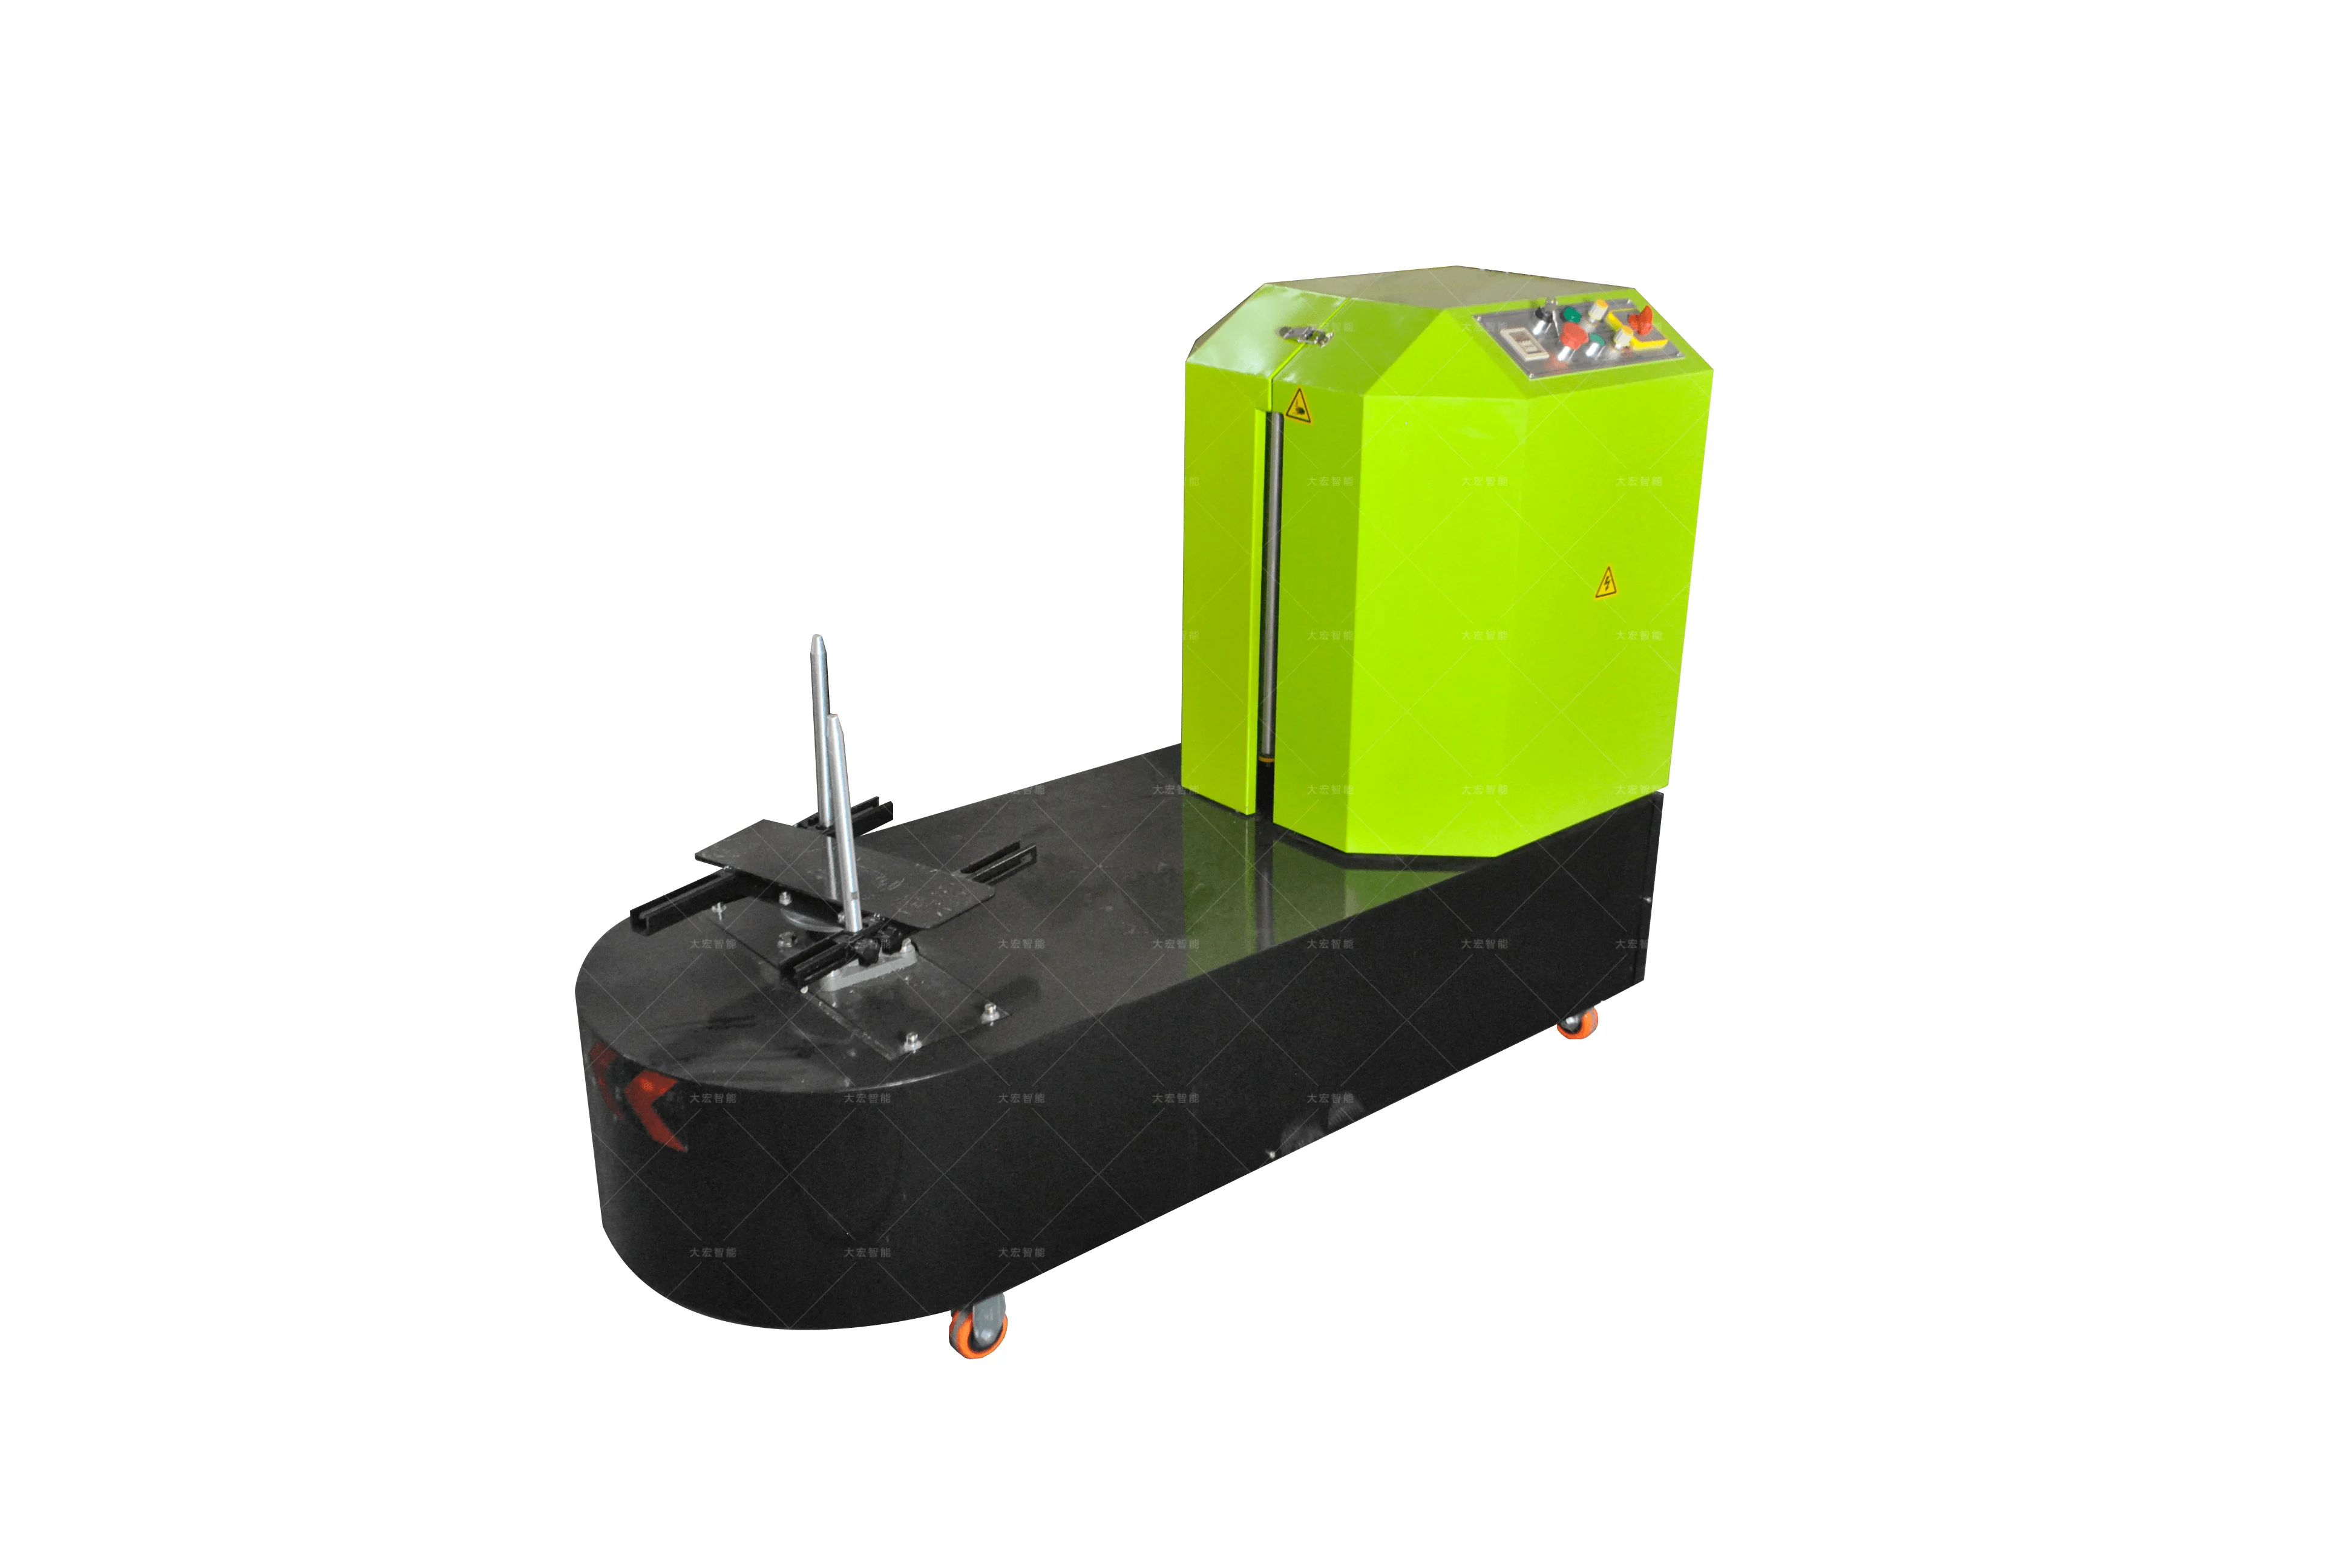 Semi-auto stretch film luggage wrapping machine for airport wrapping luggage